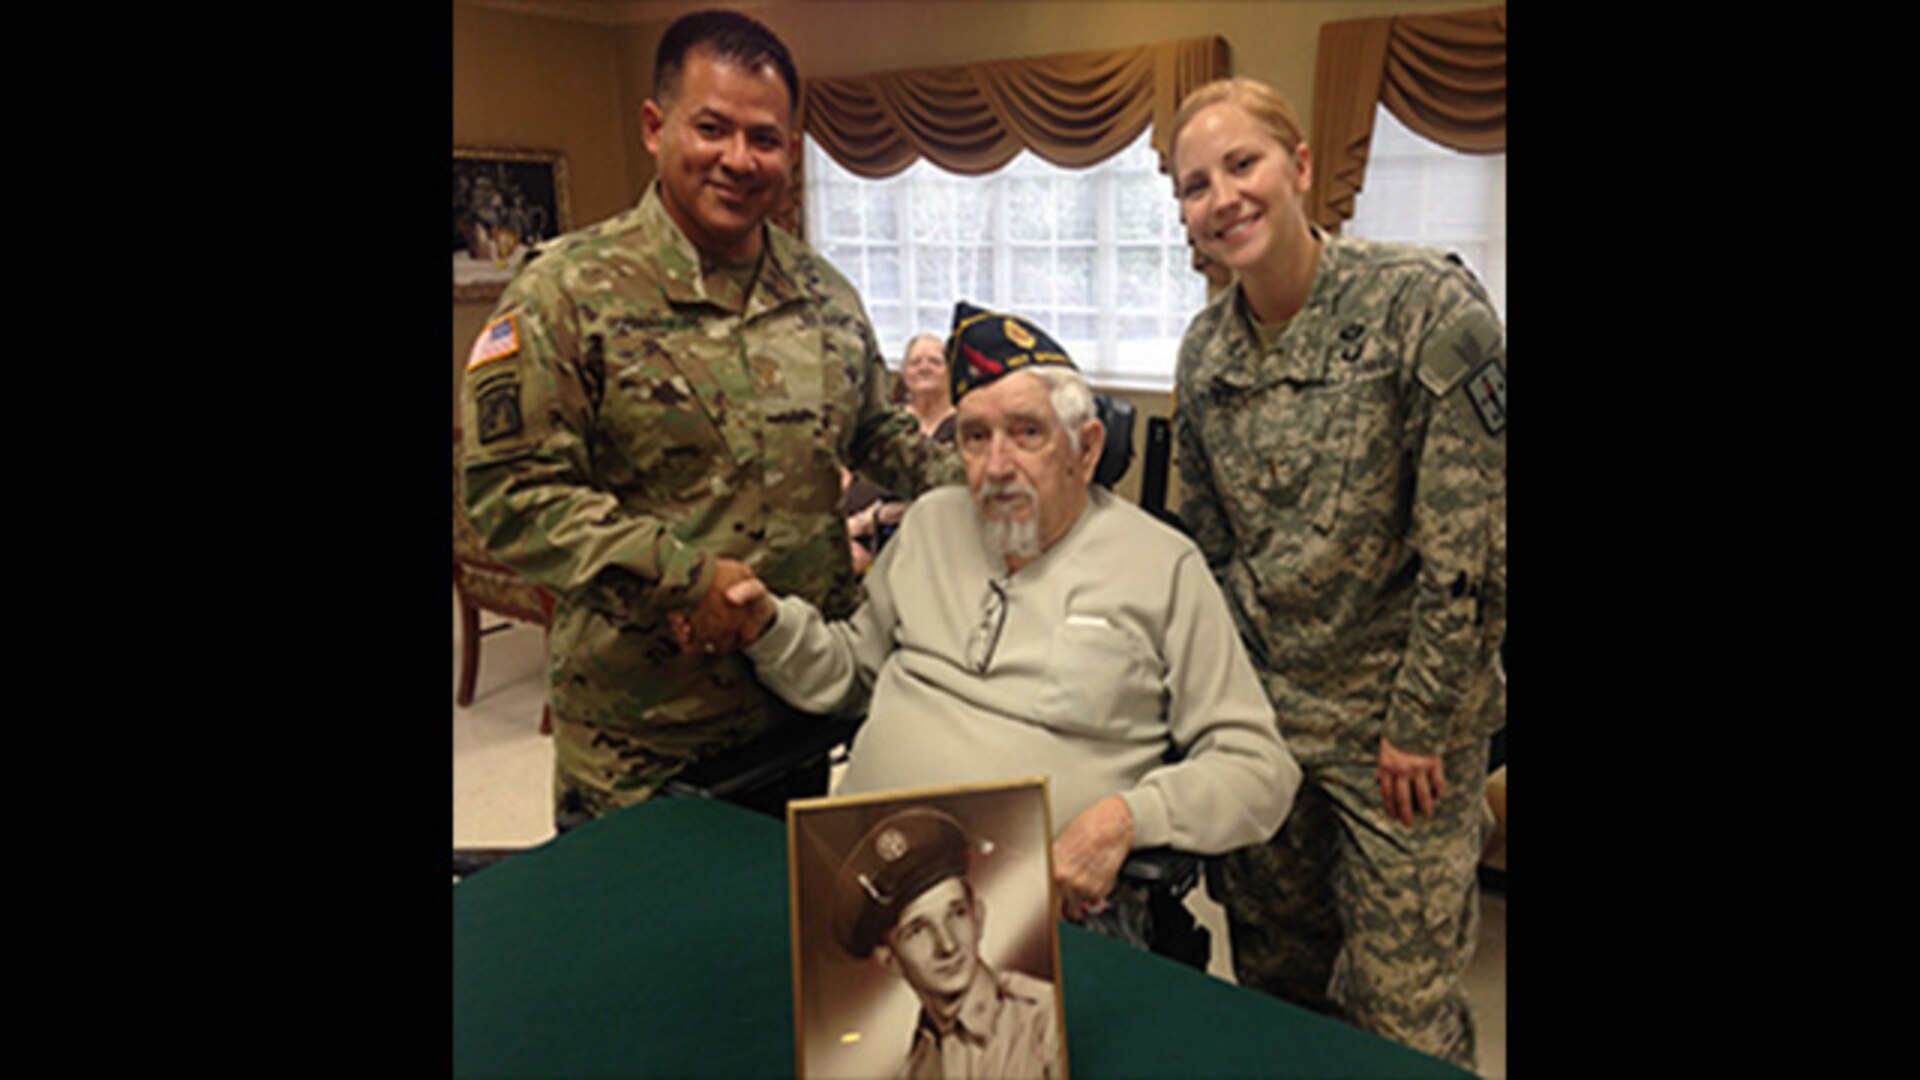 Defense Logistics Agency Aviation’s Army Maj. Alex Shimabukuro (left), operations officer, Customer Facing Division in the Customer Operations Directorate and Army Logistics University’s Basic Officer Leadership Course student, Army 2nd Lt. Nickole Kaple (right) visit veterans at Appomattox Health and Rehab Center in Hopewell, Virginia Nov. 9, 2016 for a Veterans Day celebration. World War II Air Force Veteran Paul Boyett (center) was among those presented with a pin and certificate for his service during a "pinning and certificate" ceremony held at the facility.